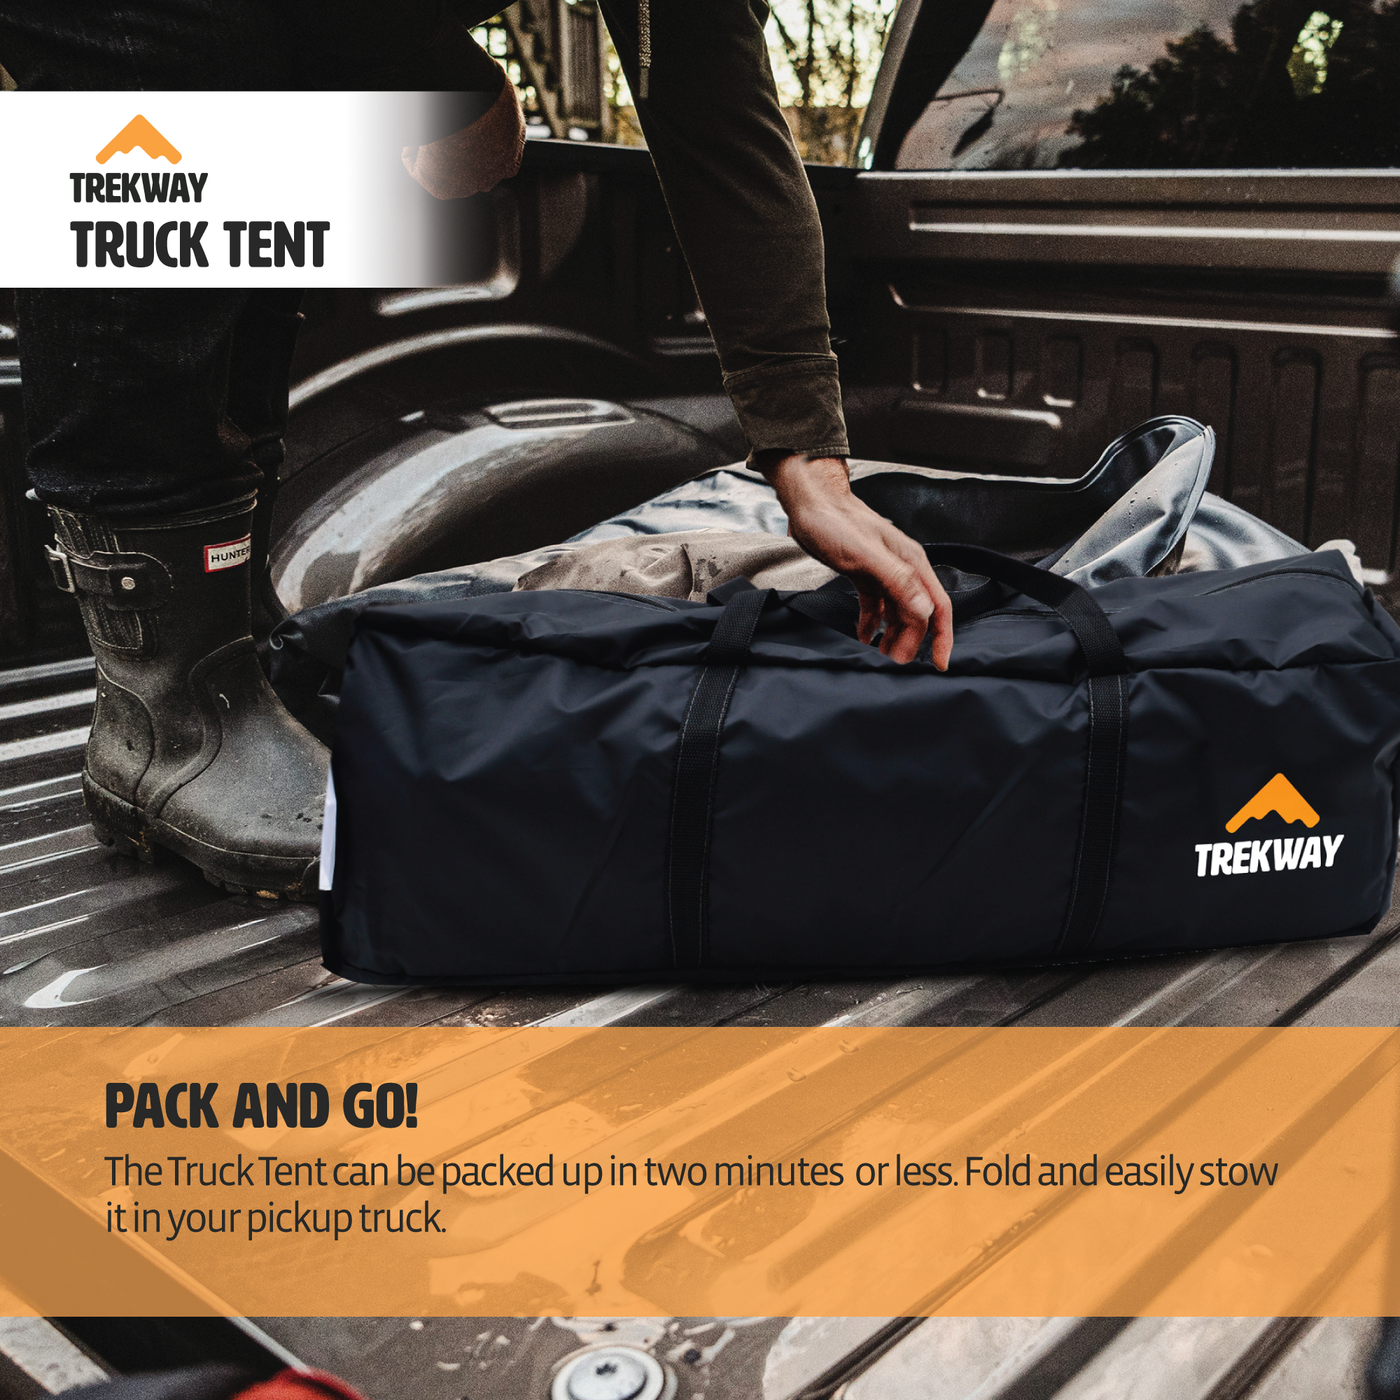 Offroading Gear Truck Bed Tent With Awning